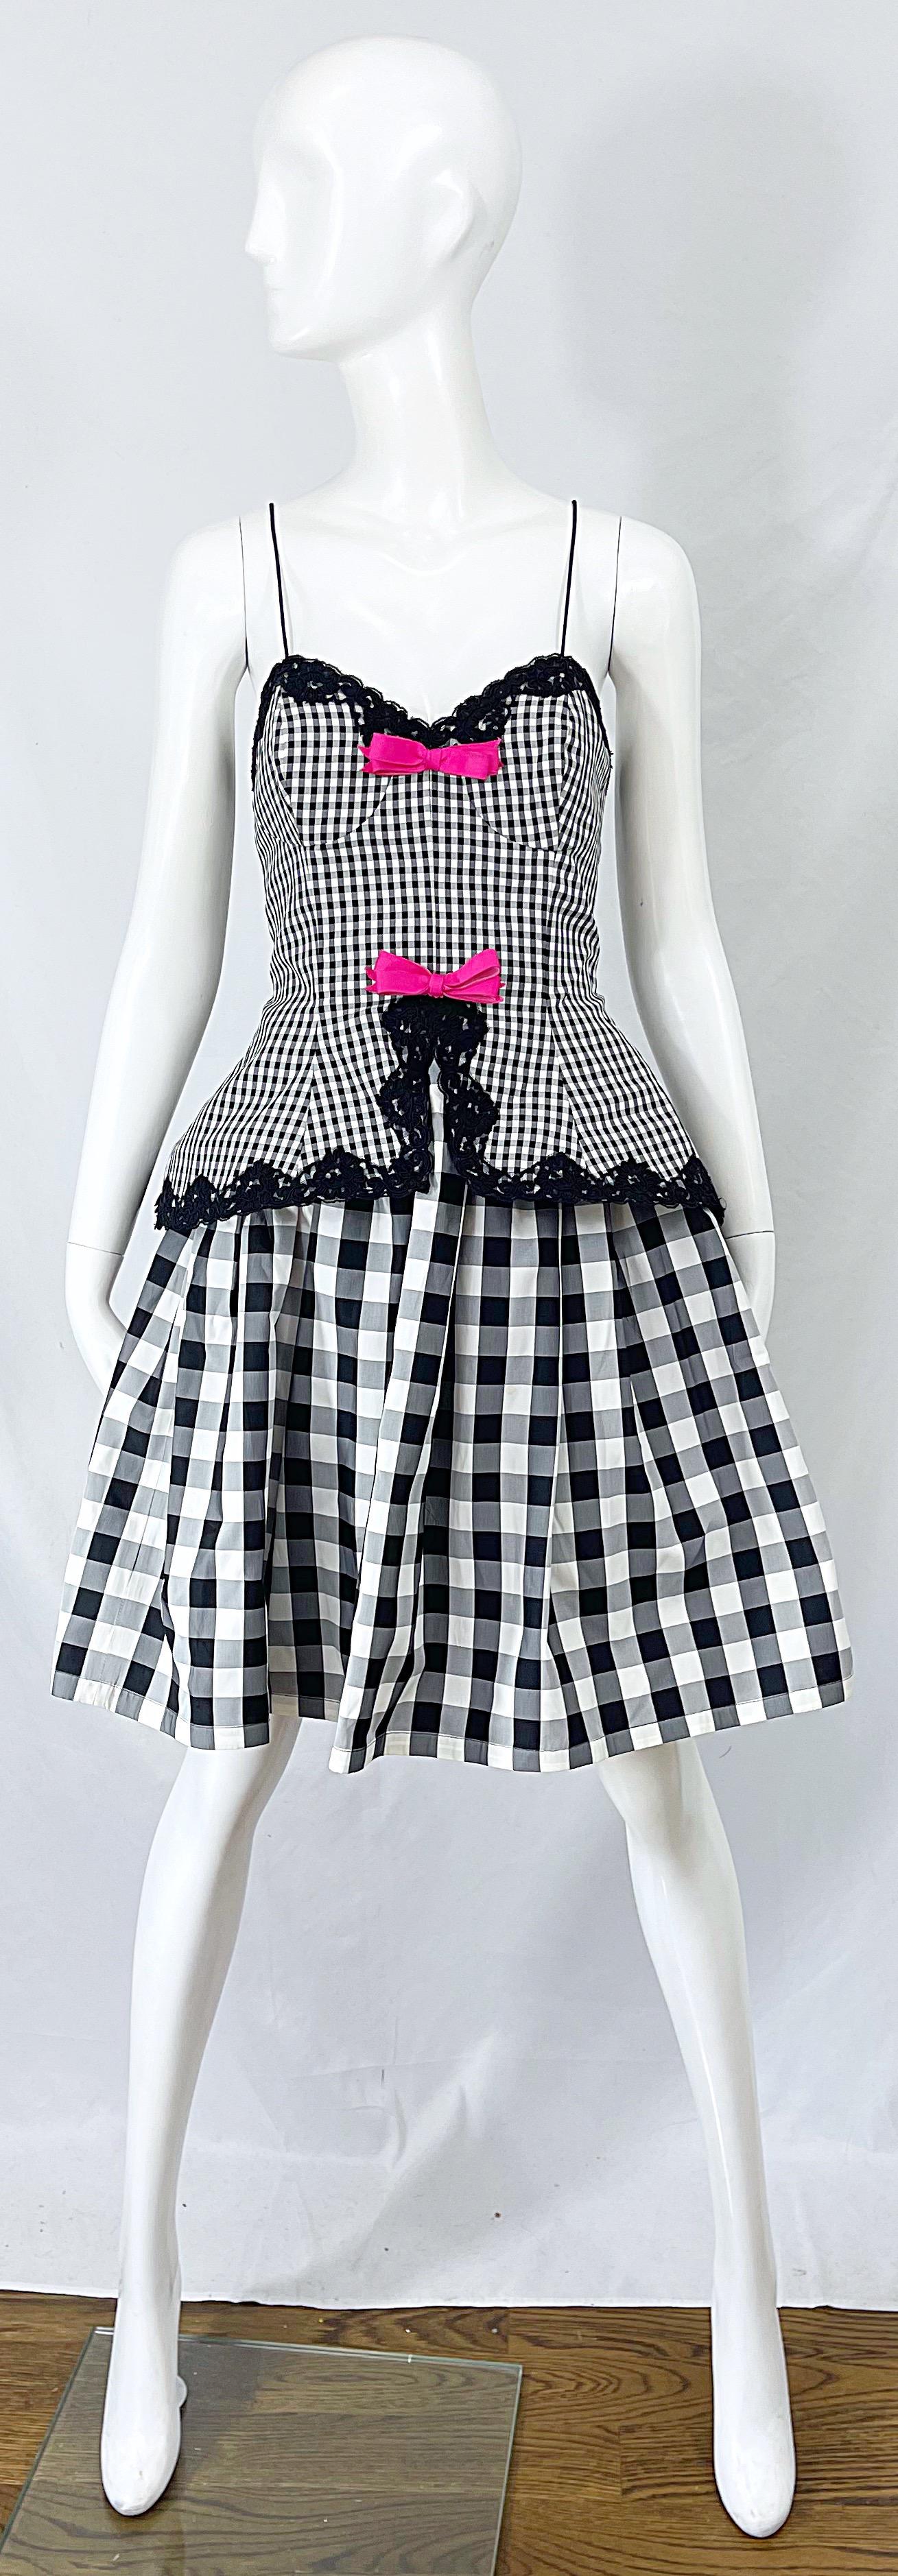 Beautiful late 80s BILL BLASS Size 6 black and white gingham silk taffeta dress with hot pink bows. Fit and flare style with a boned tailored bodice and full forgiving skirt. Hidden zipper up the back with hook-and-eye closure. Thin spaghetti straps